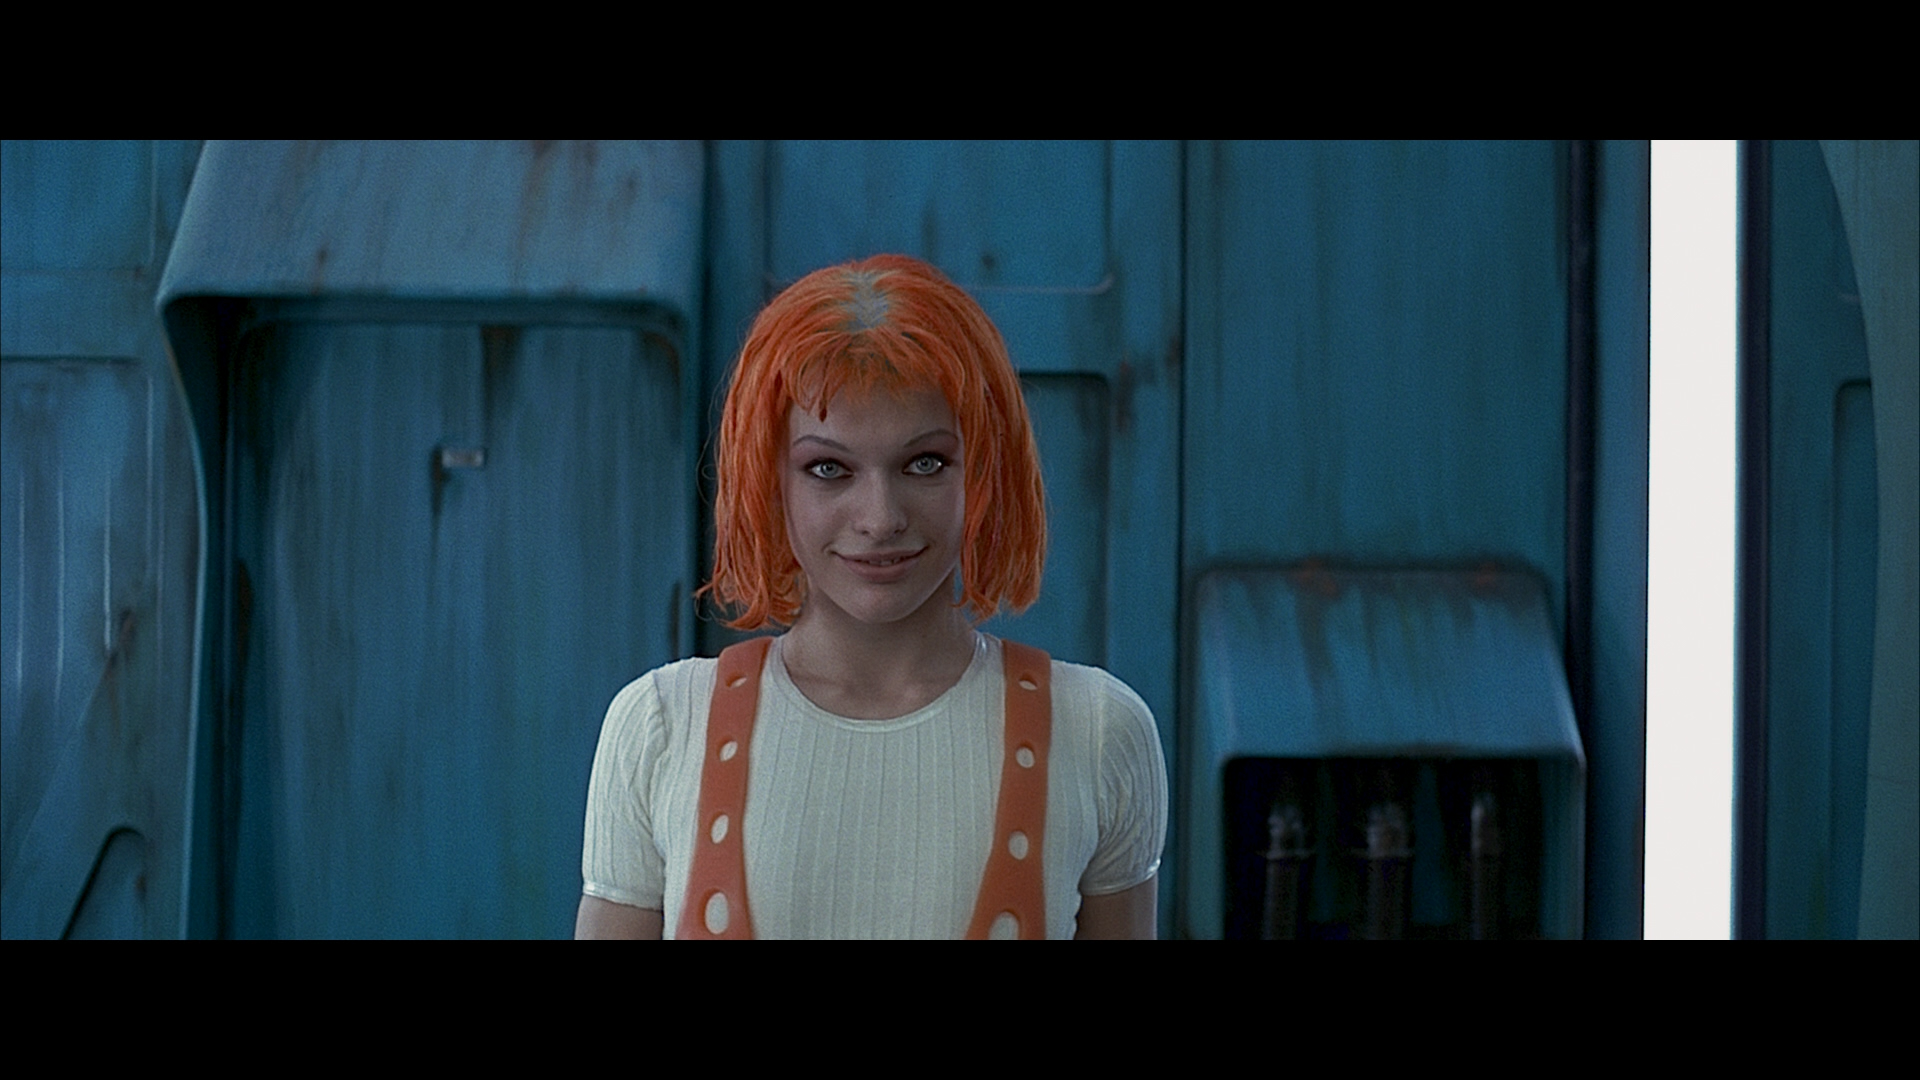 Milla Jovovich as Leeloo in Luc Besson's The Fifth Element